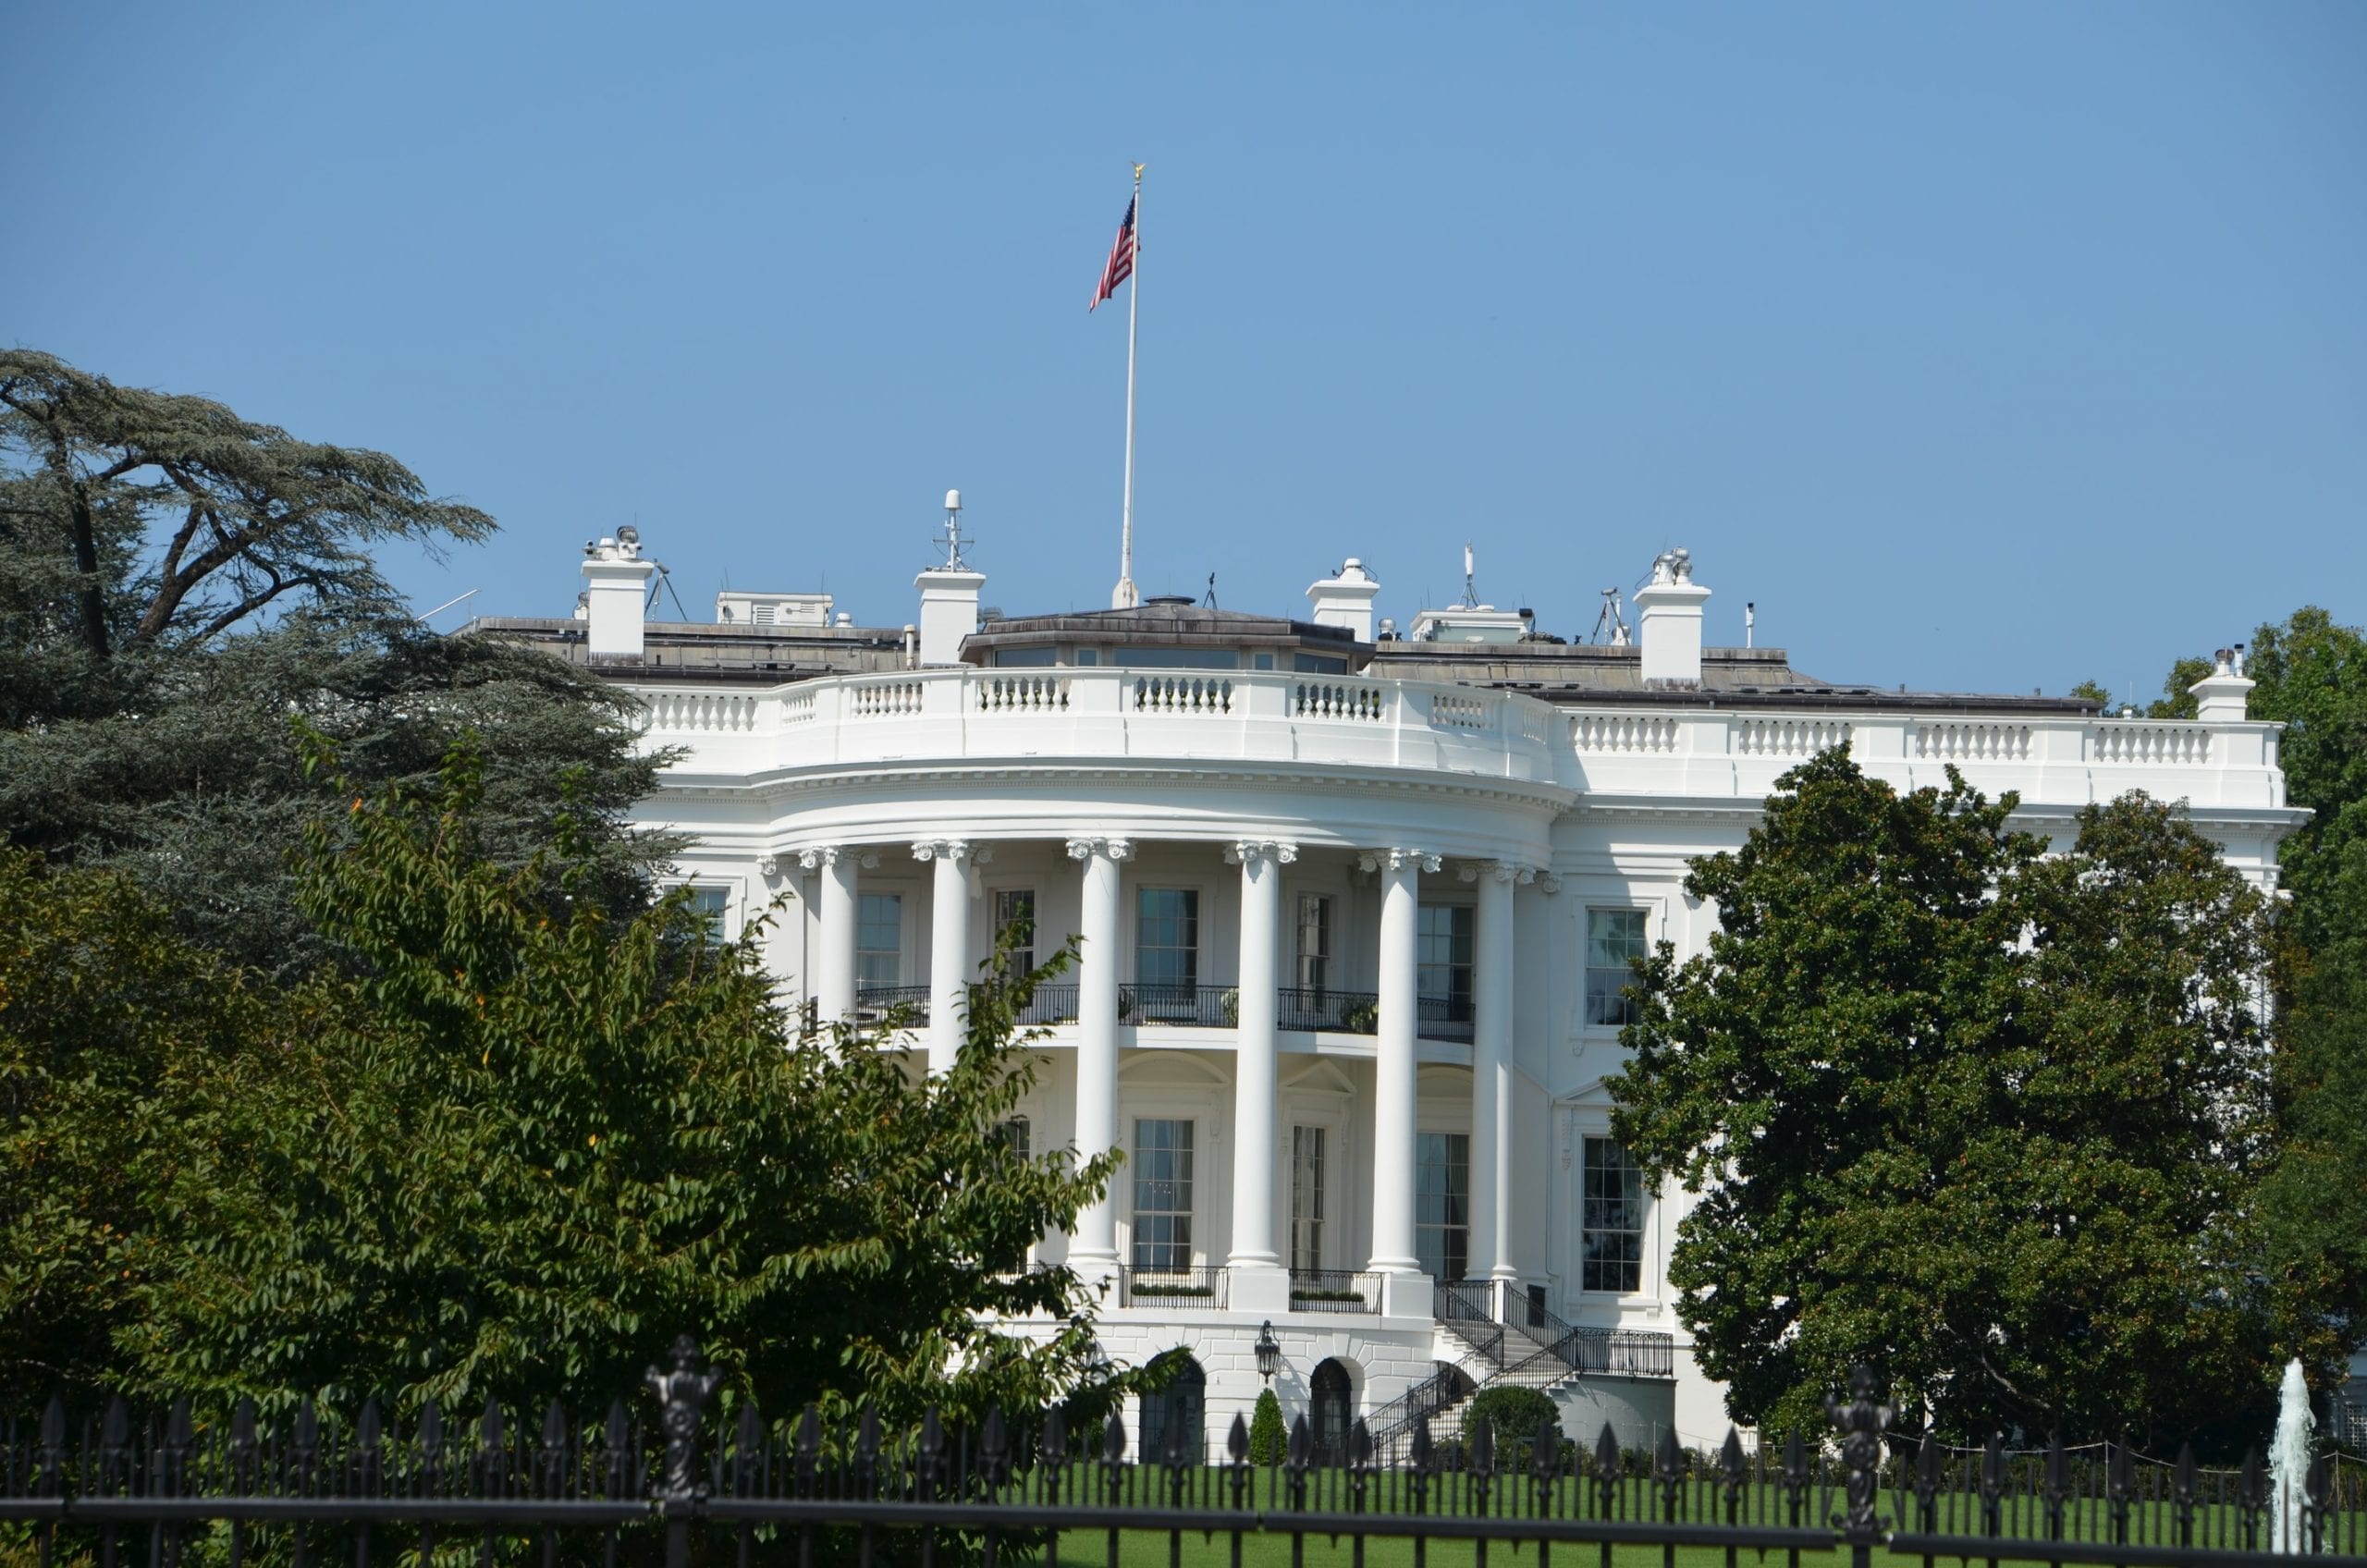 interesting facts about the White House